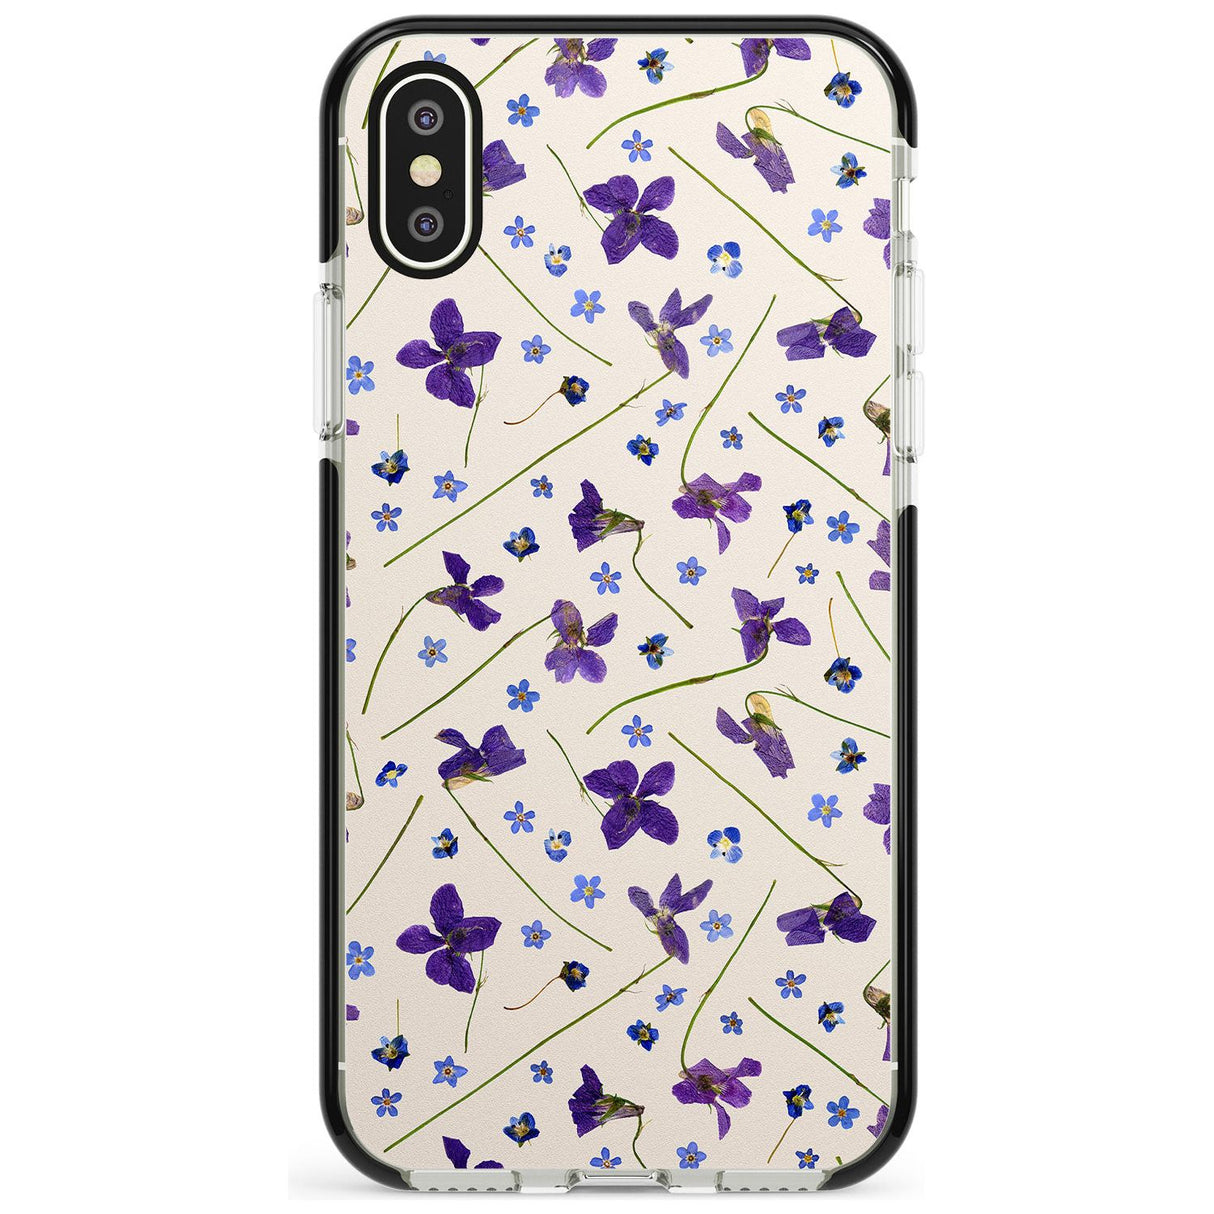 Violet Floral Pattern Design - Cream Black Impact Phone Case for iPhone X XS Max XR